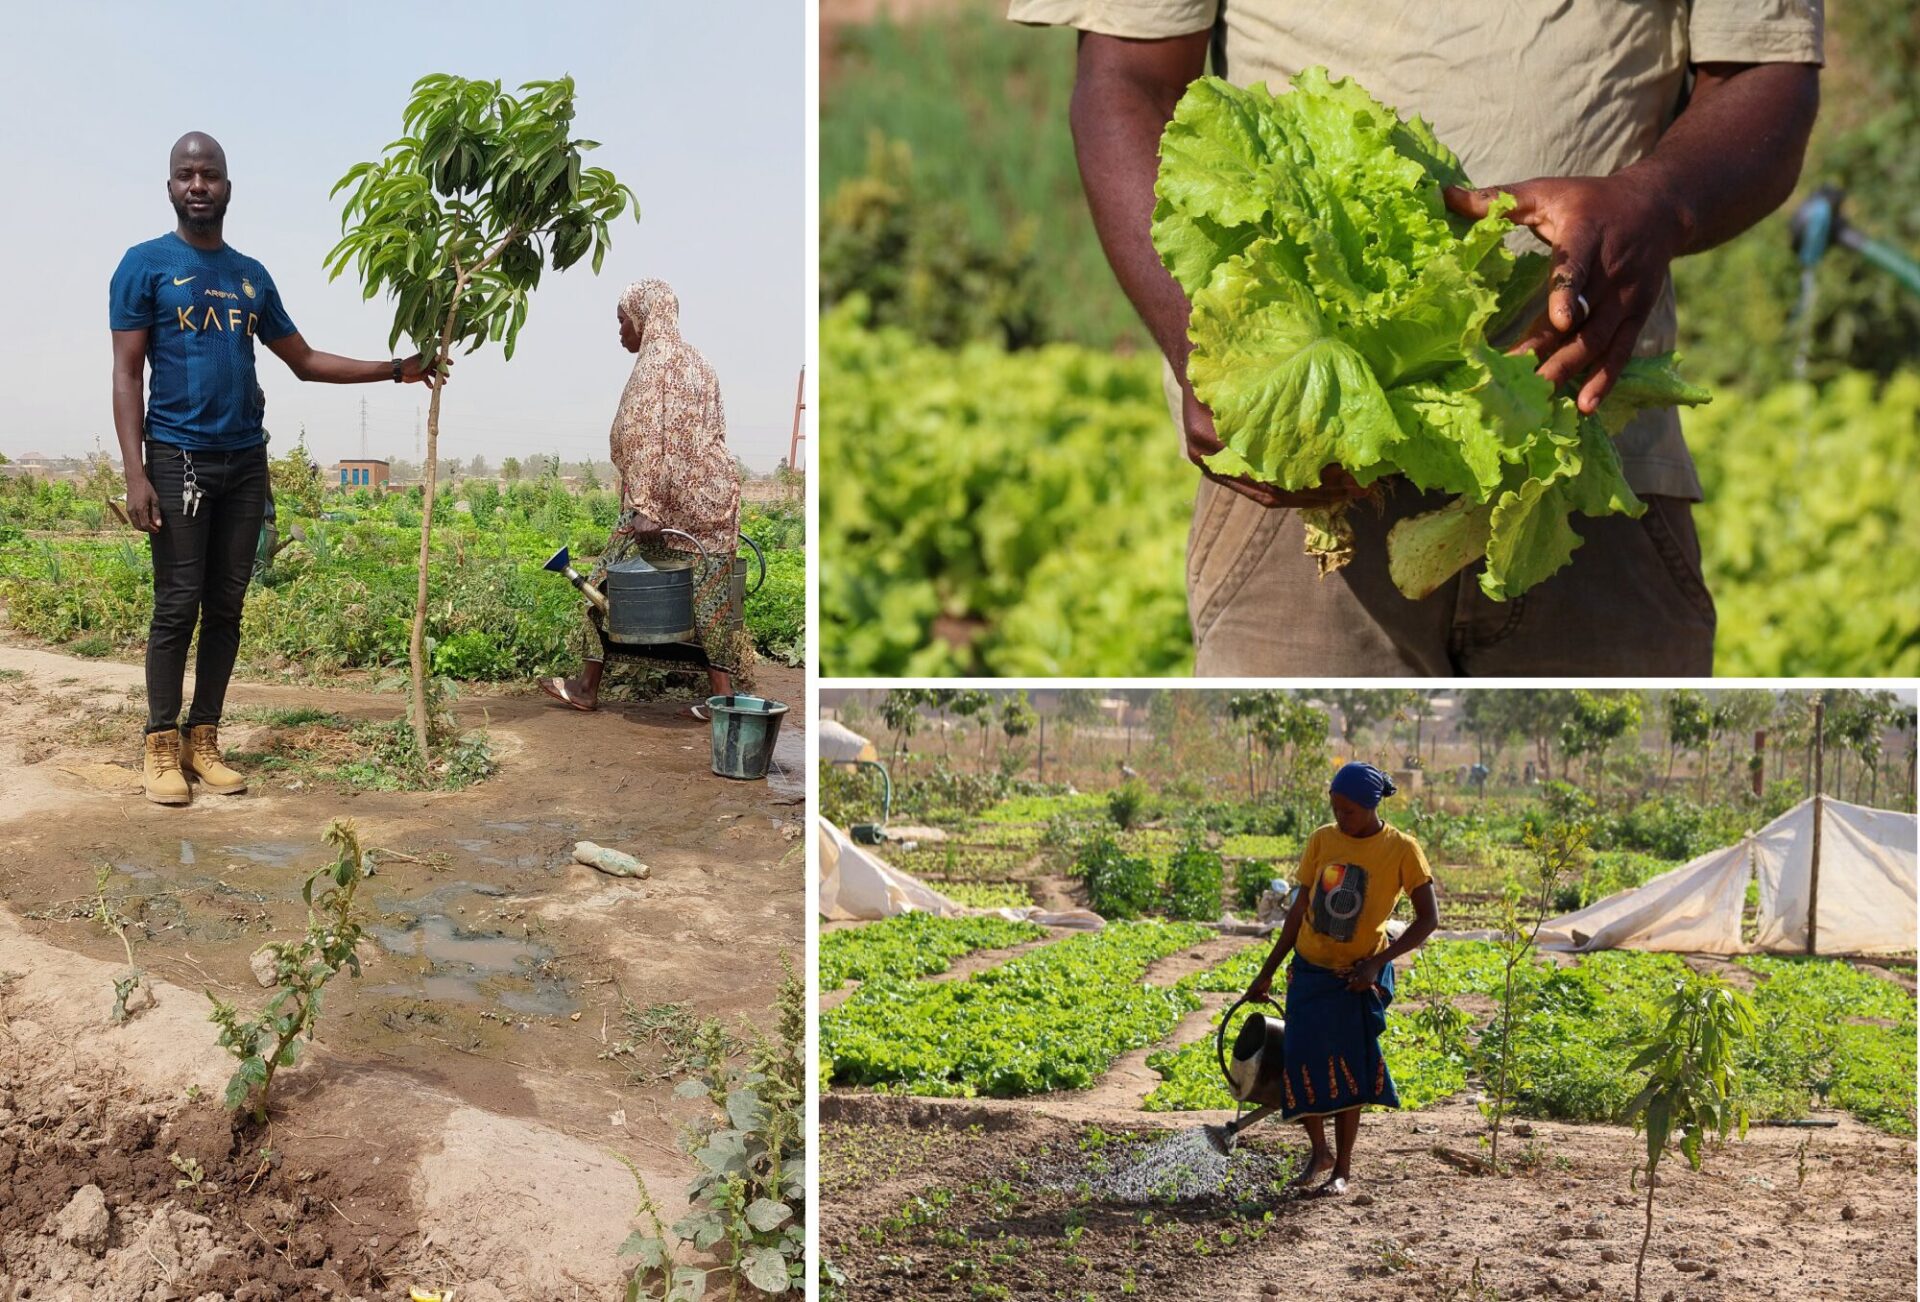 Collage of 3 photos of the LoCoFoRest project in Burkina Faso: Left: person standing beside a young tree plant. Top right: close up of someone's hands holding a green, fresh lettuce. Bottom right: a person watering a line of crops with a watering can.